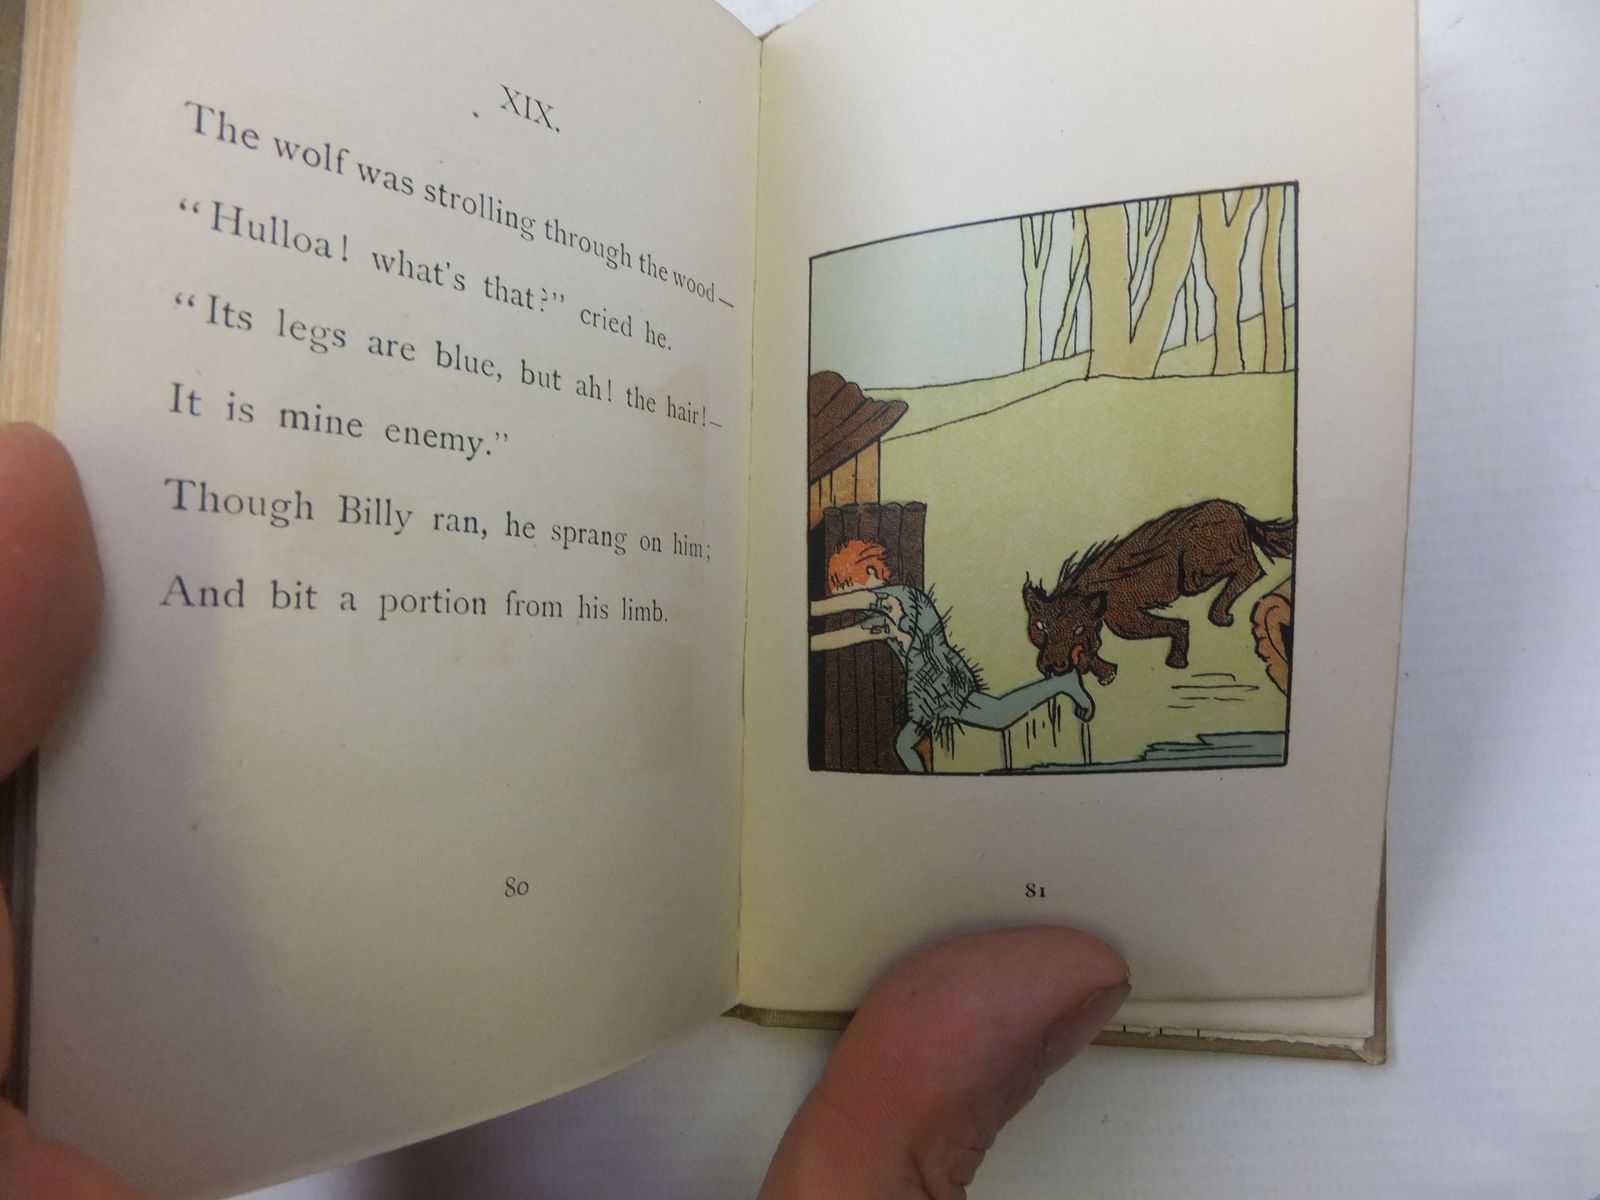 Photo of BILLY RUDDYLOX AN ANCIENT BRITISH BOY written by Schofield, Lilly illustrated by Schofield, Lily published by Swan Sonnenschein & Co. Ltd. (STOCK CODE: 2112018)  for sale by Stella & Rose's Books